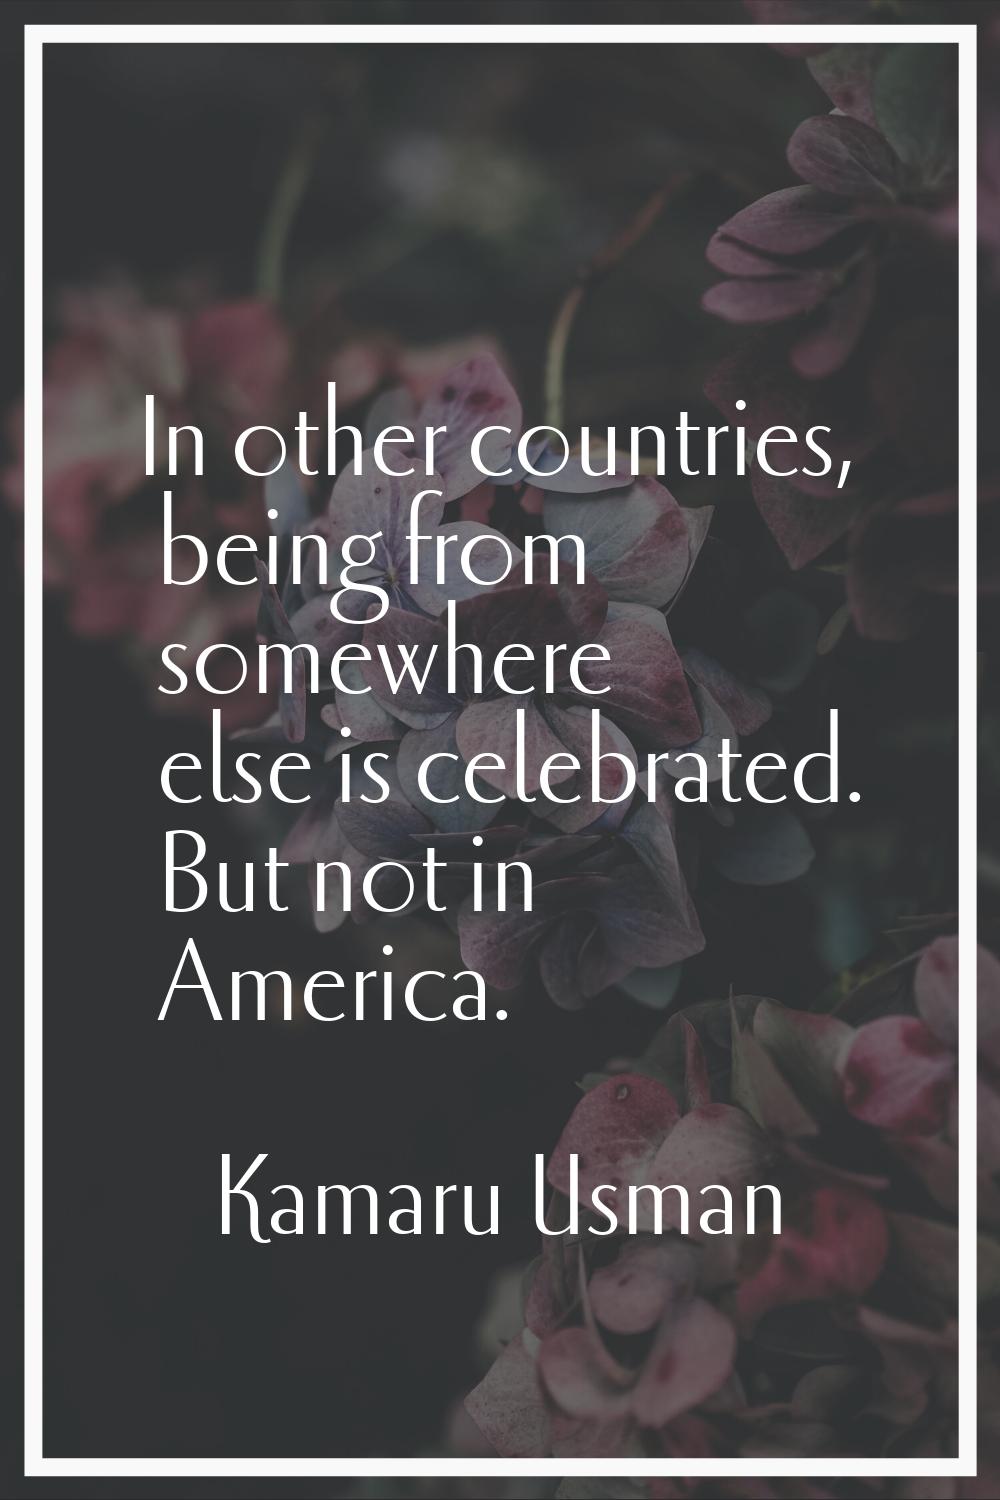 In other countries, being from somewhere else is celebrated. But not in America.